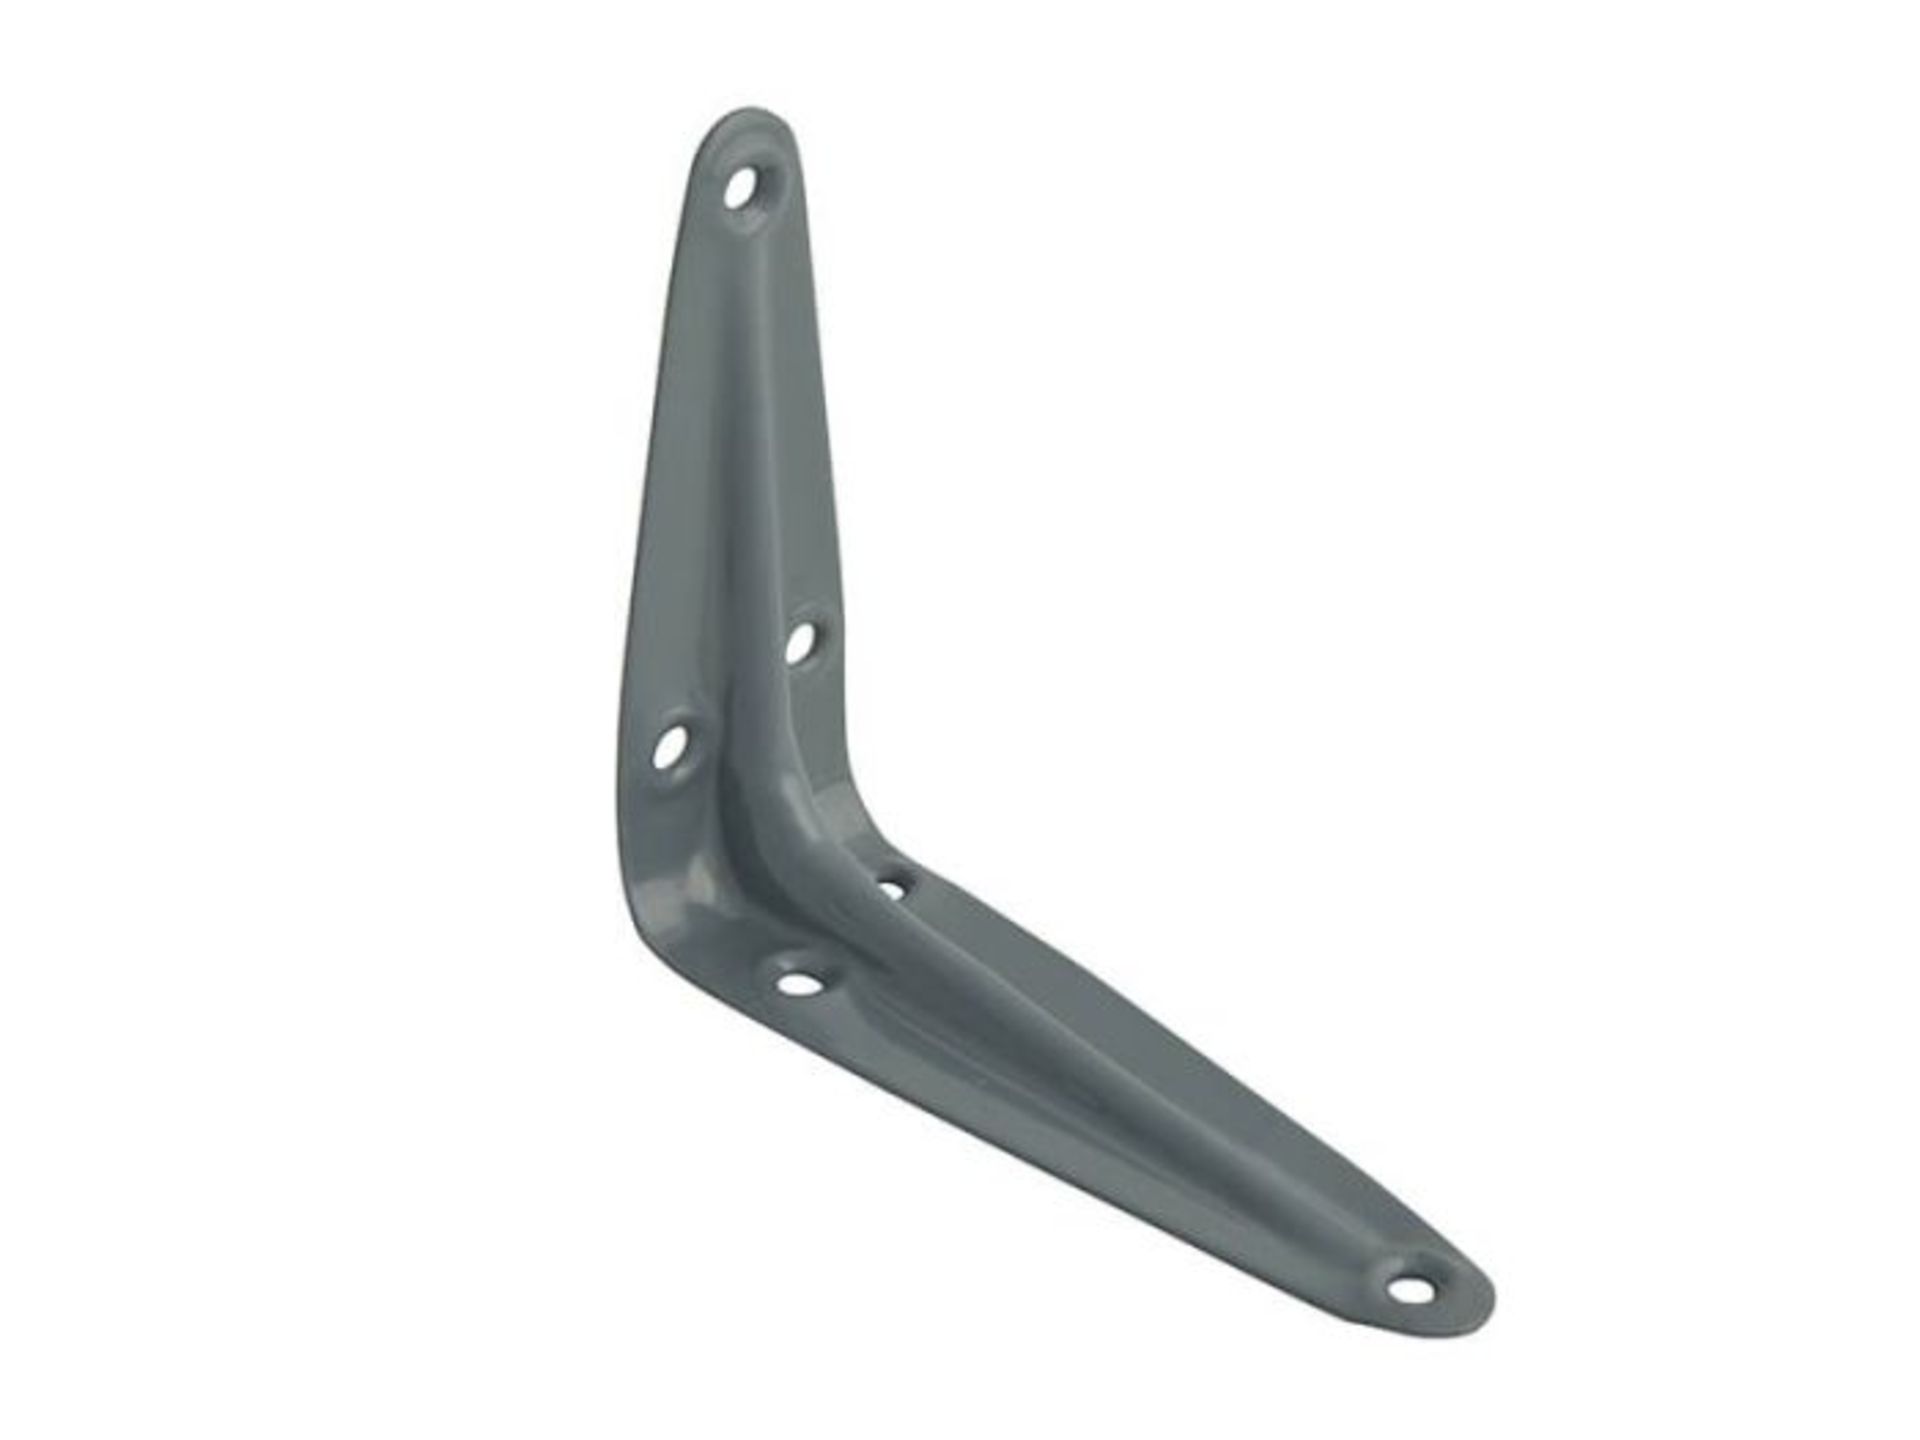 Pack of 100 Forge London Pattern Shelf Brackets Grey 3"" x 4"" RRP £39 - Image 2 of 2